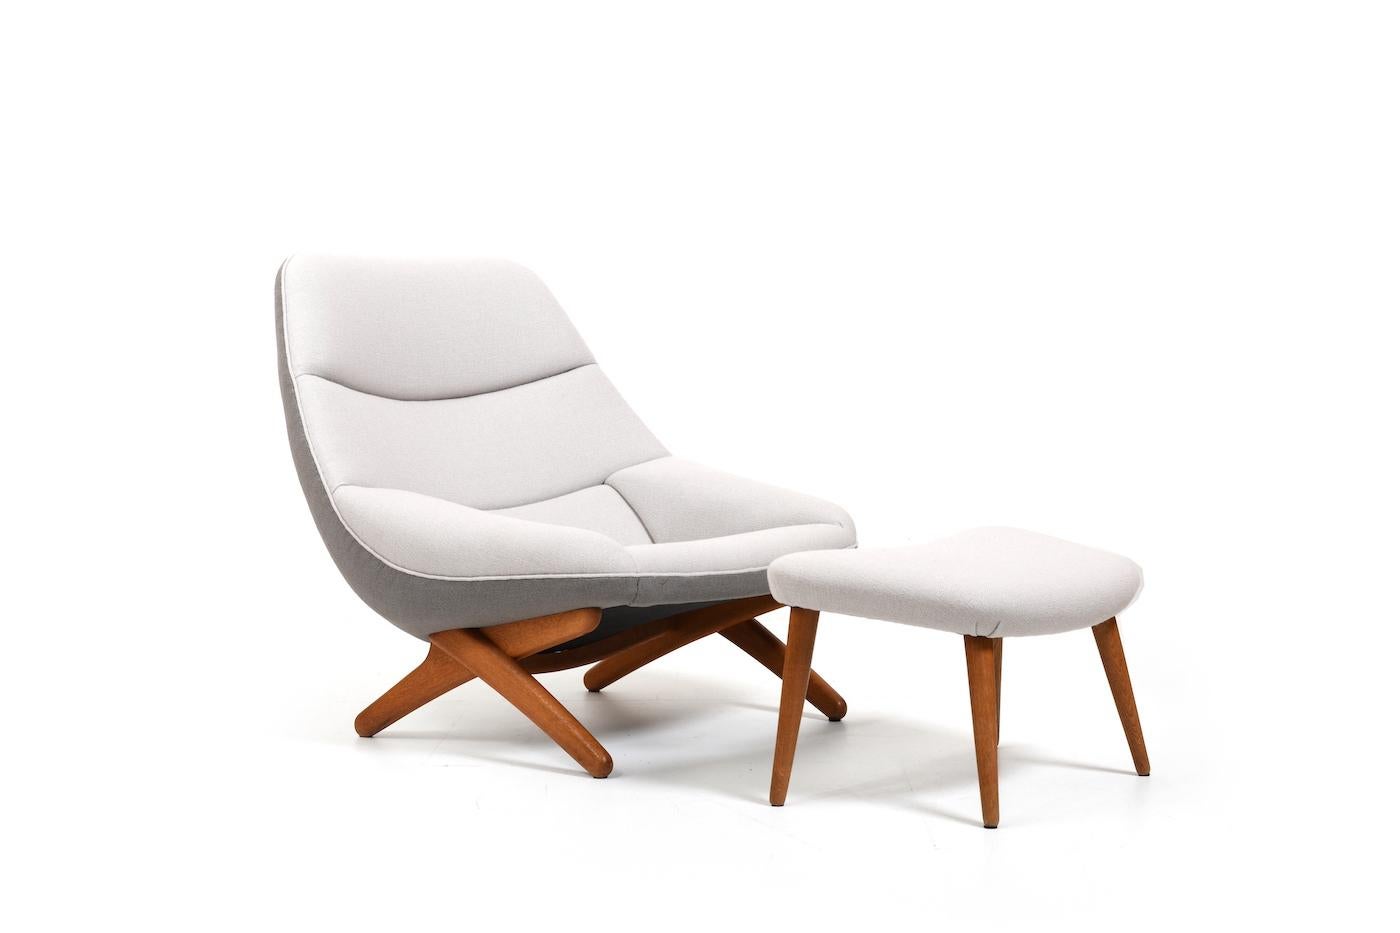 Illum Wikkelsø for A. Mikael Laursen, Danish organic shaped lounge chair with ottoman. Model ML91. Legs / base in solid oak wood. New upholstered with grey Kvadrat Hallingdal by AP Polstring Aalborg Denmark. Produced, 1950s.